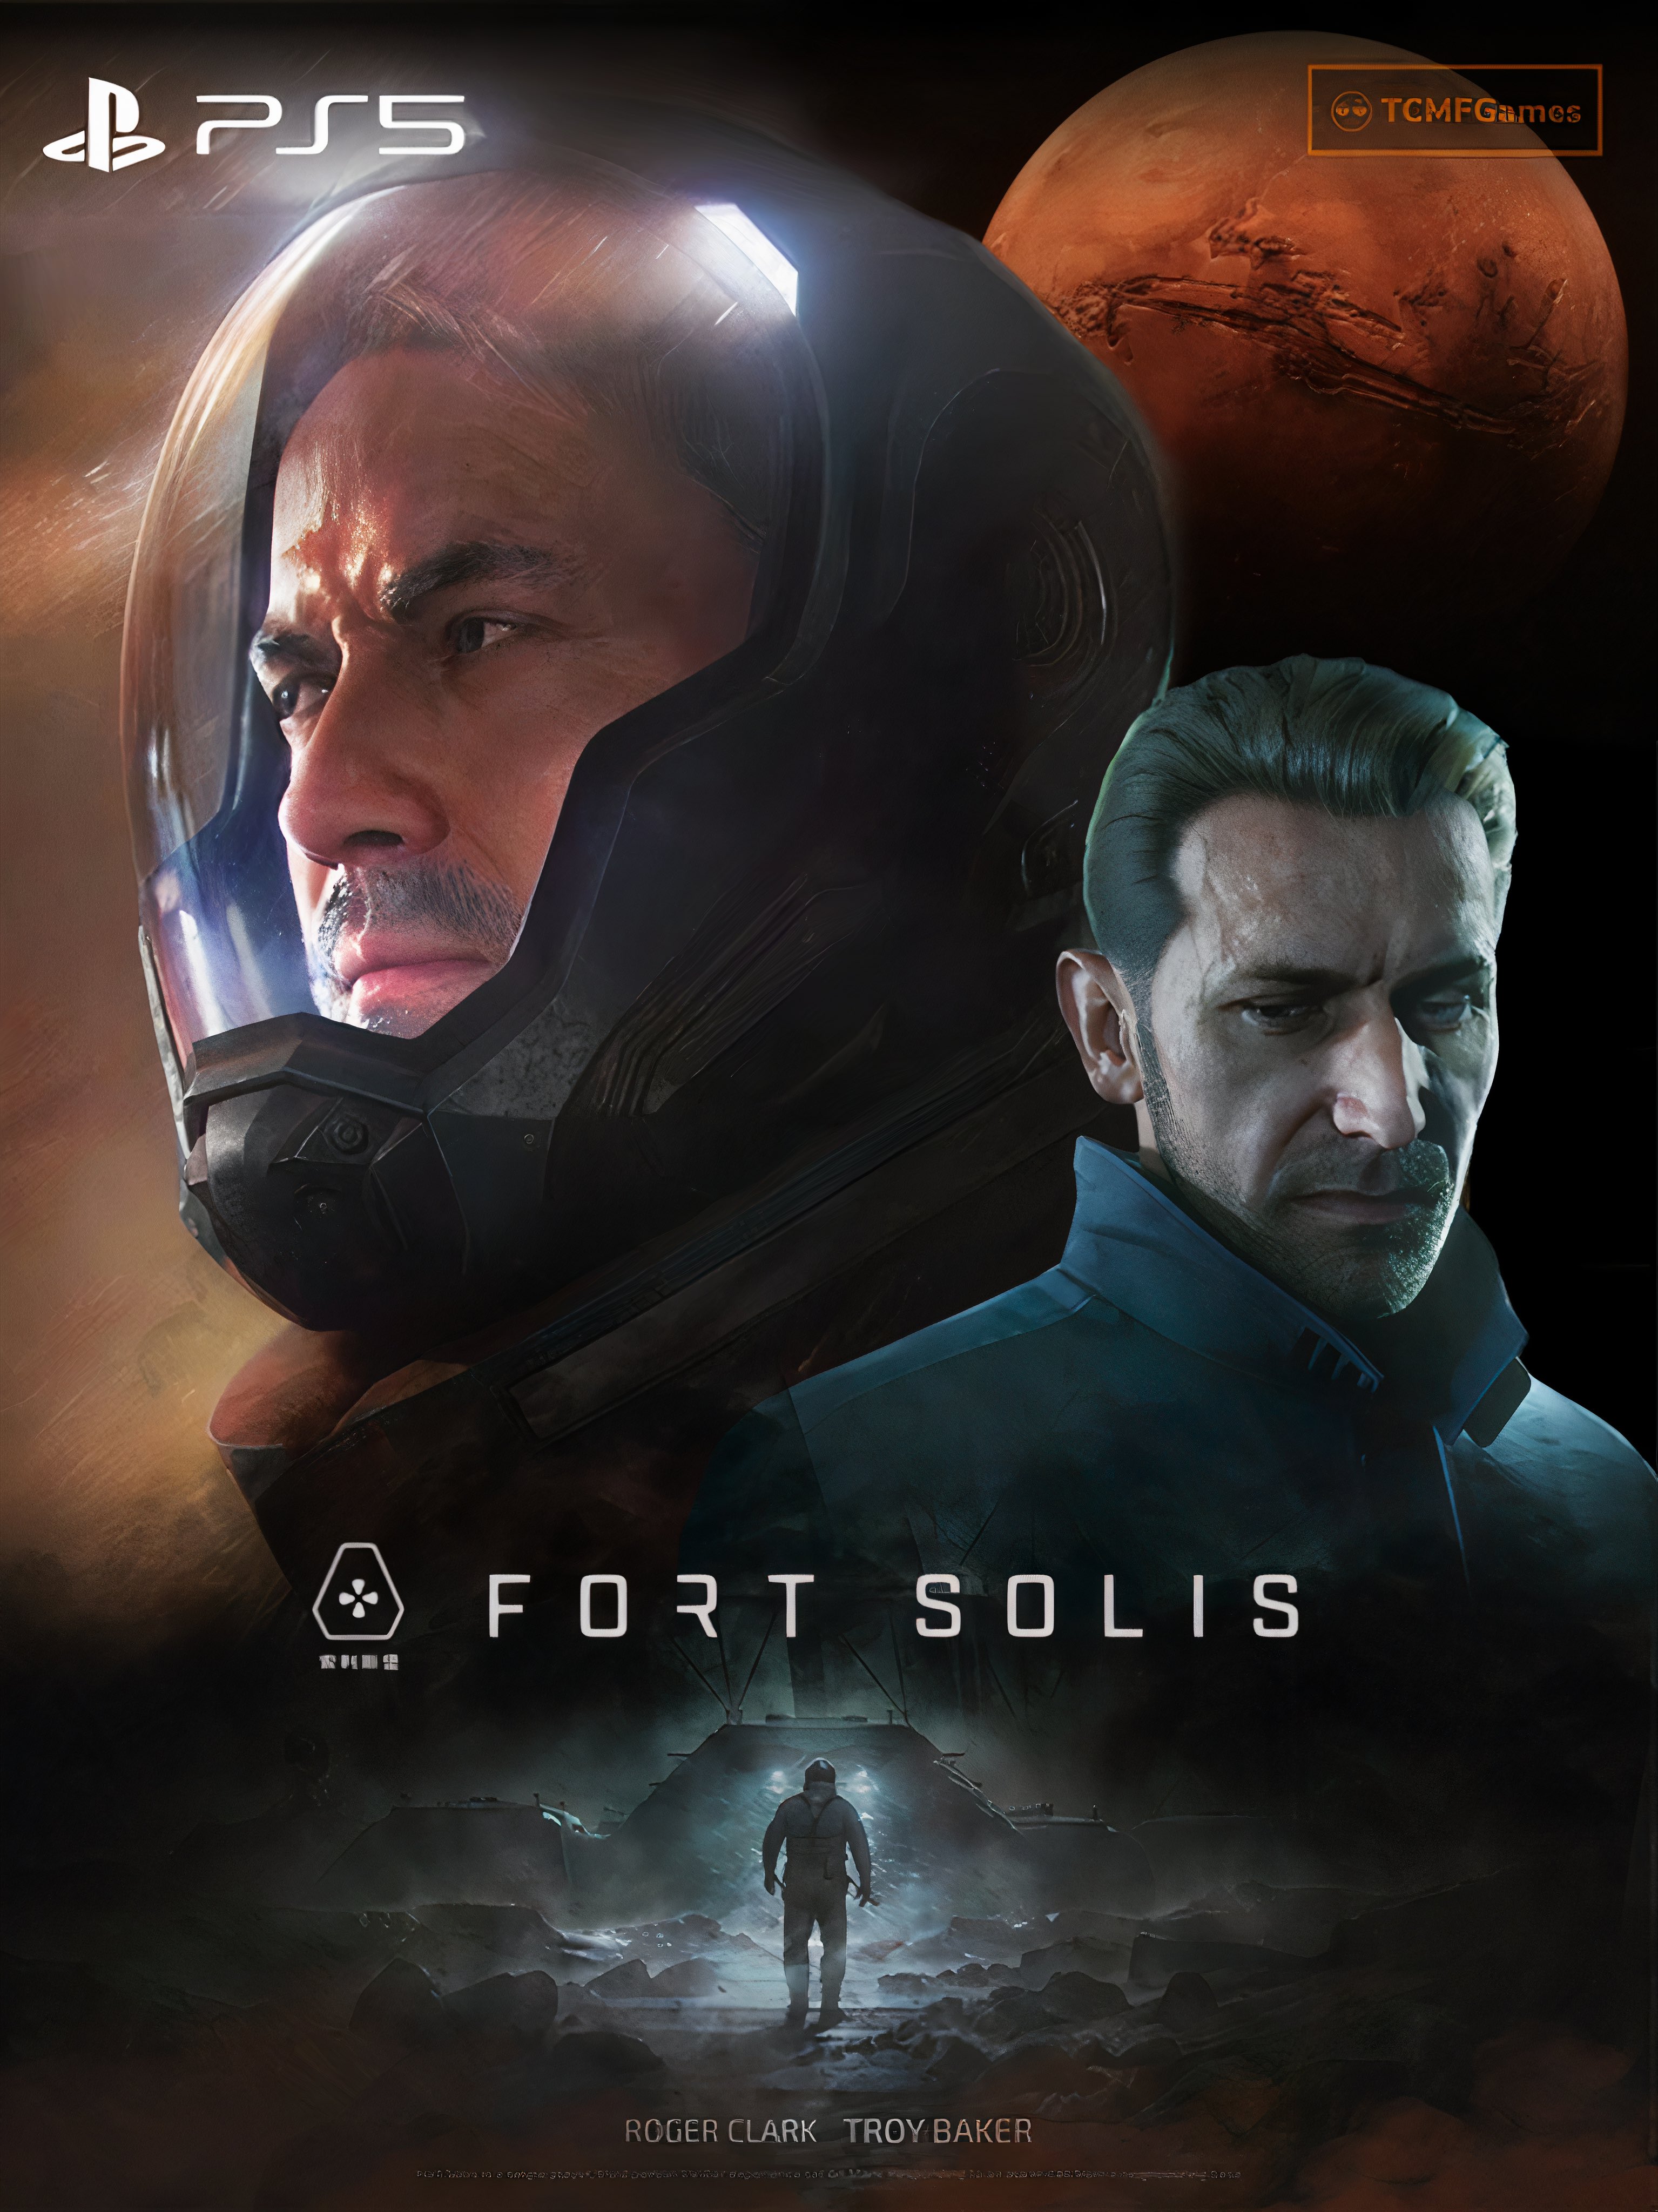 TCMFGames on X: PS5 Exclusive Sci-Fi Thriller Fort Solis has a release  date, it officially drops this August 22nd. ✓ Unreal Engine 5 ✓ Story  focused on Mars mining station, Fort Solis